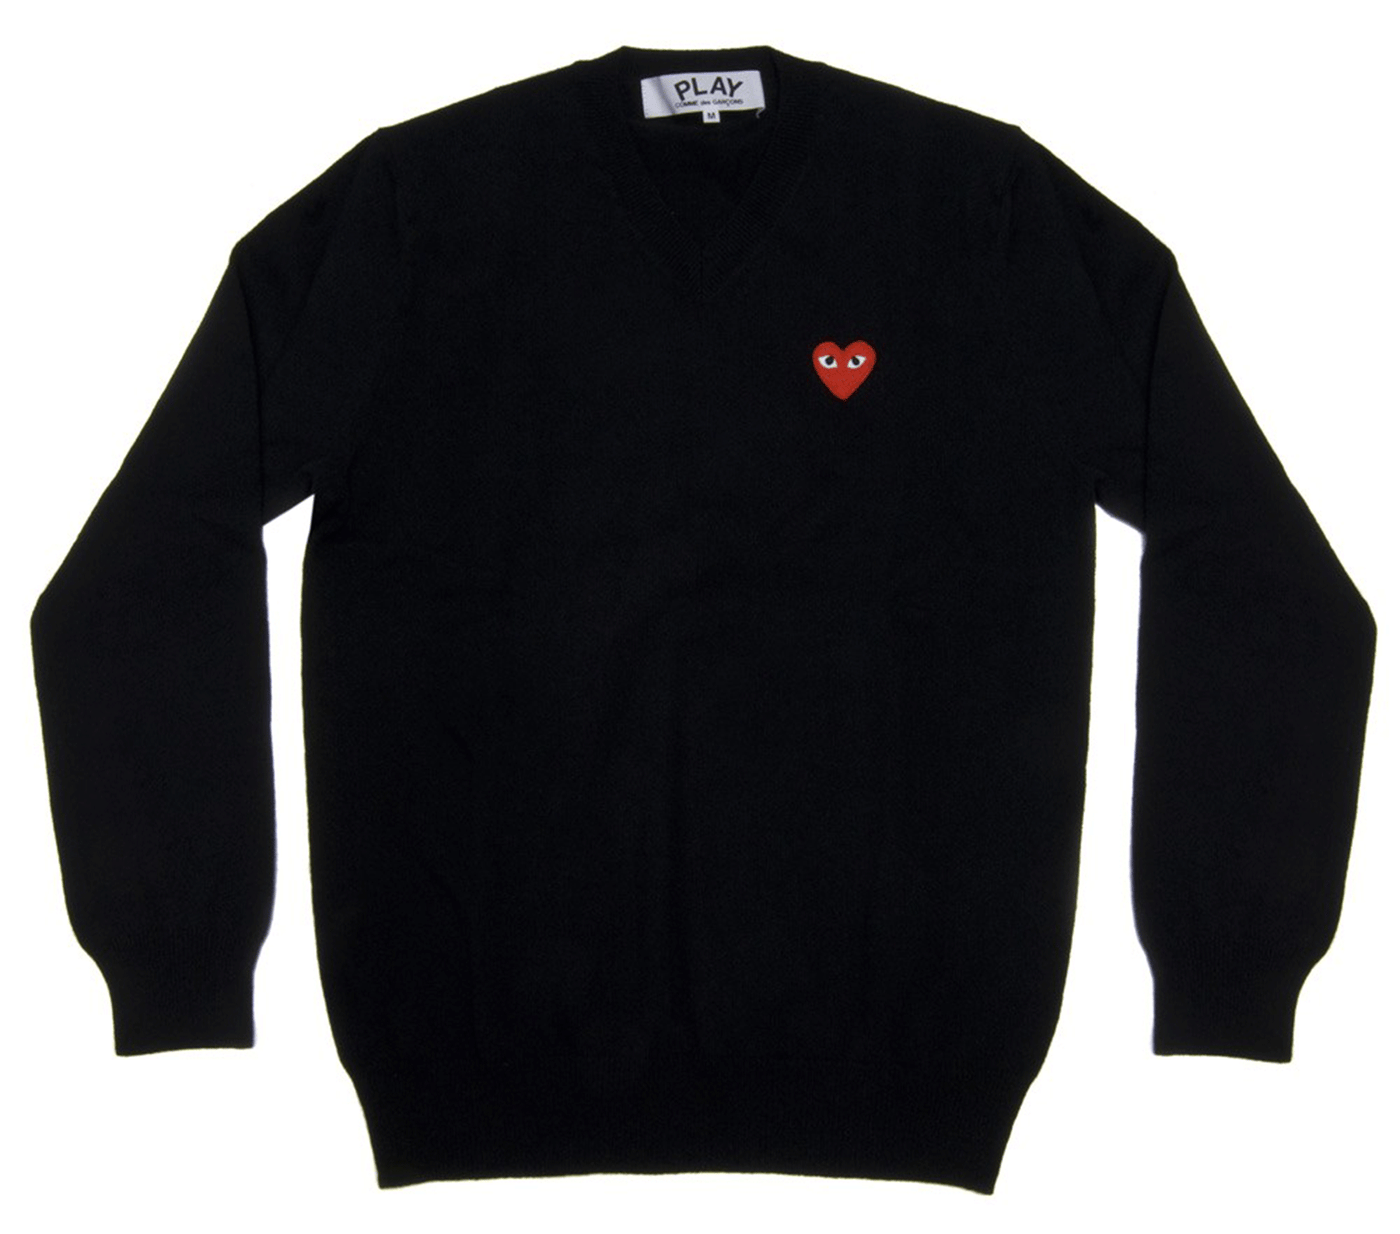 Comme-des-Garcons-Play-Red-Heart-Sweater-Men-Black-1